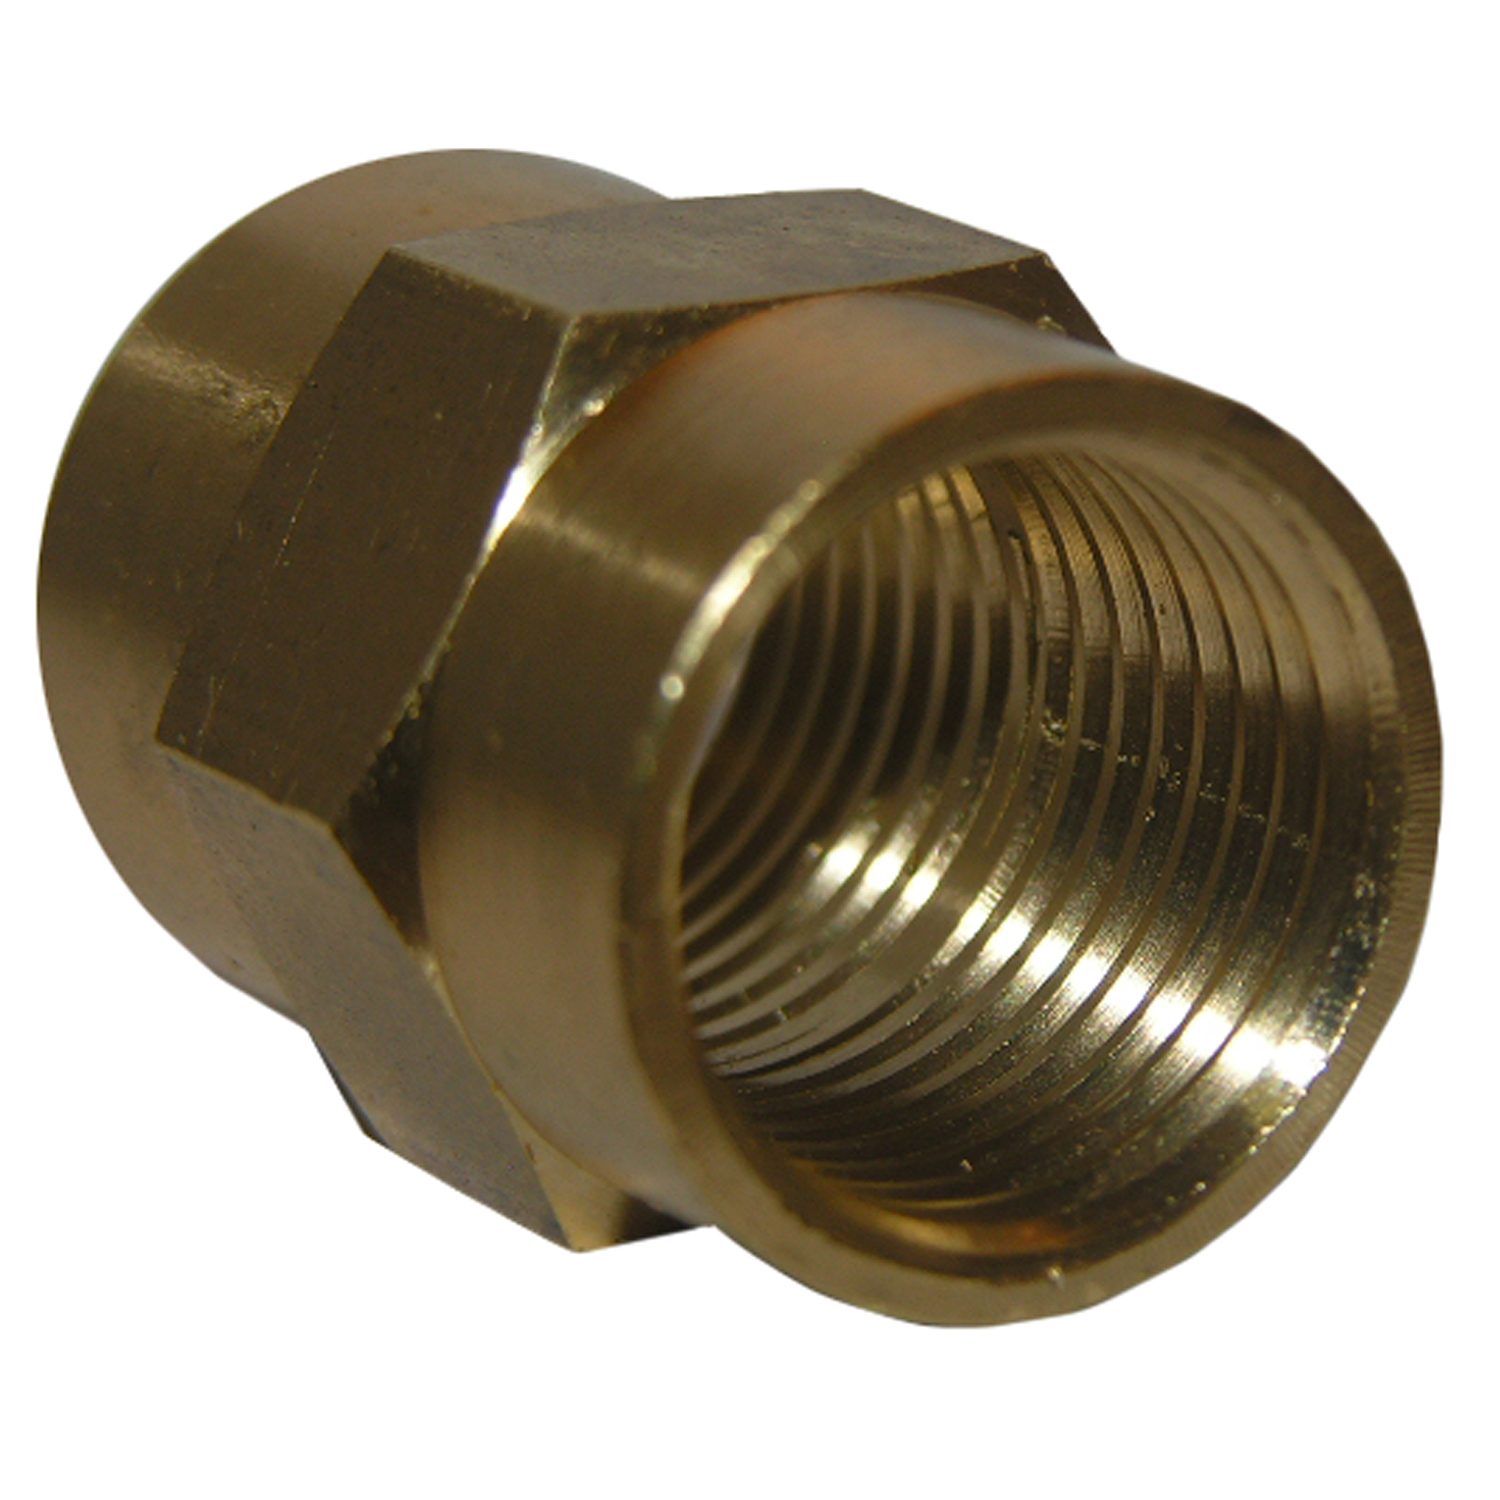 Lasco 17-9225 Pipe Coupling, 3/8 in, FPT, Brass